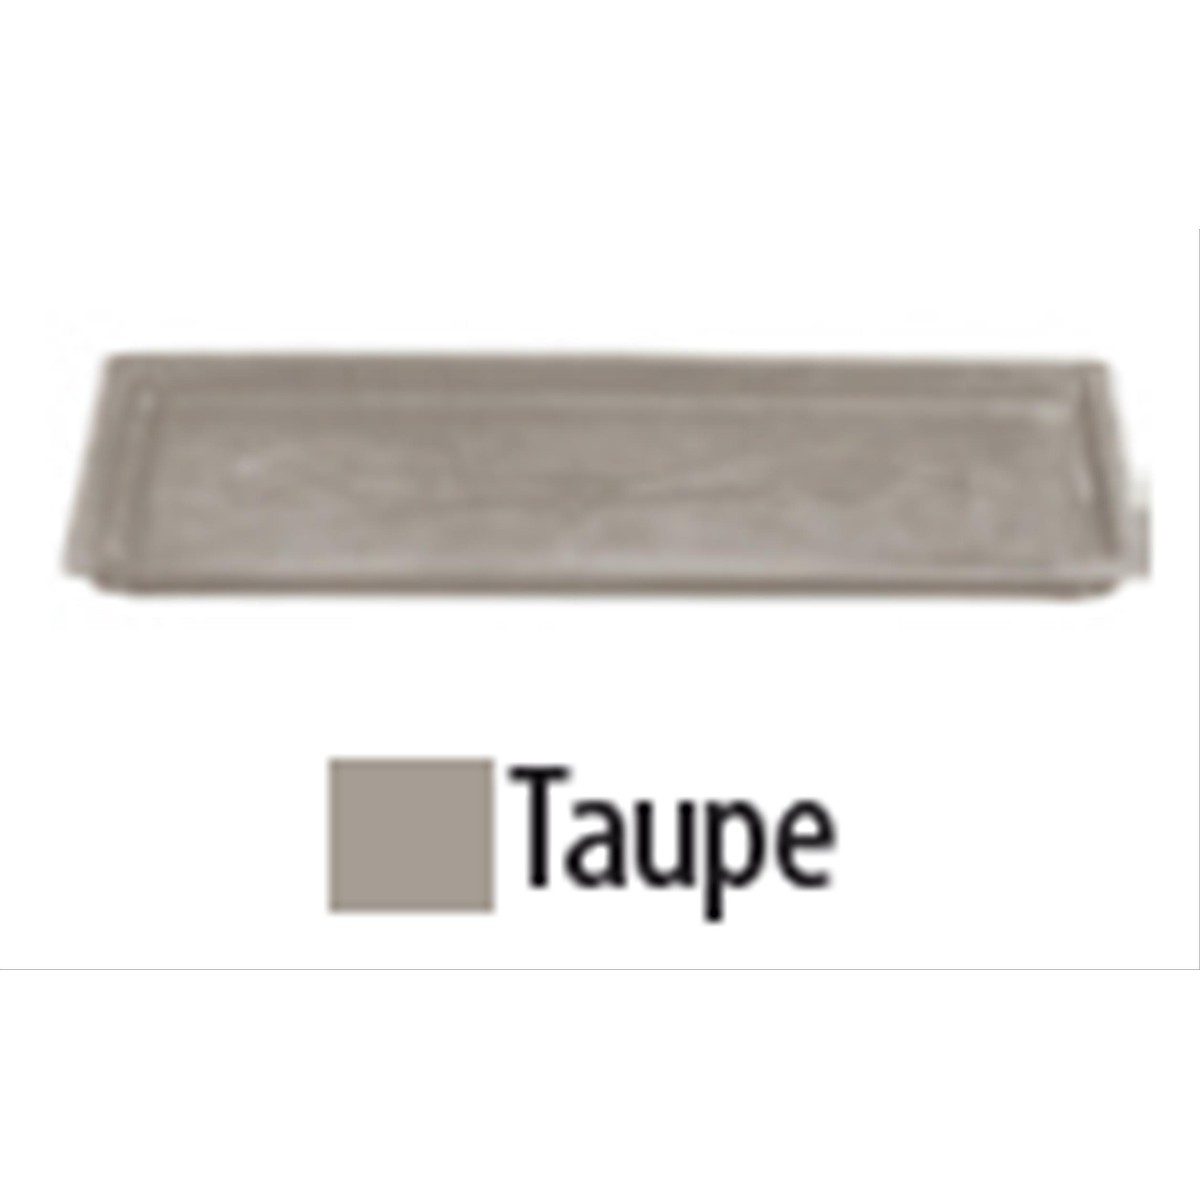   Plateau ORION Taupe Gris taupe 49 x 13 x 3 cm